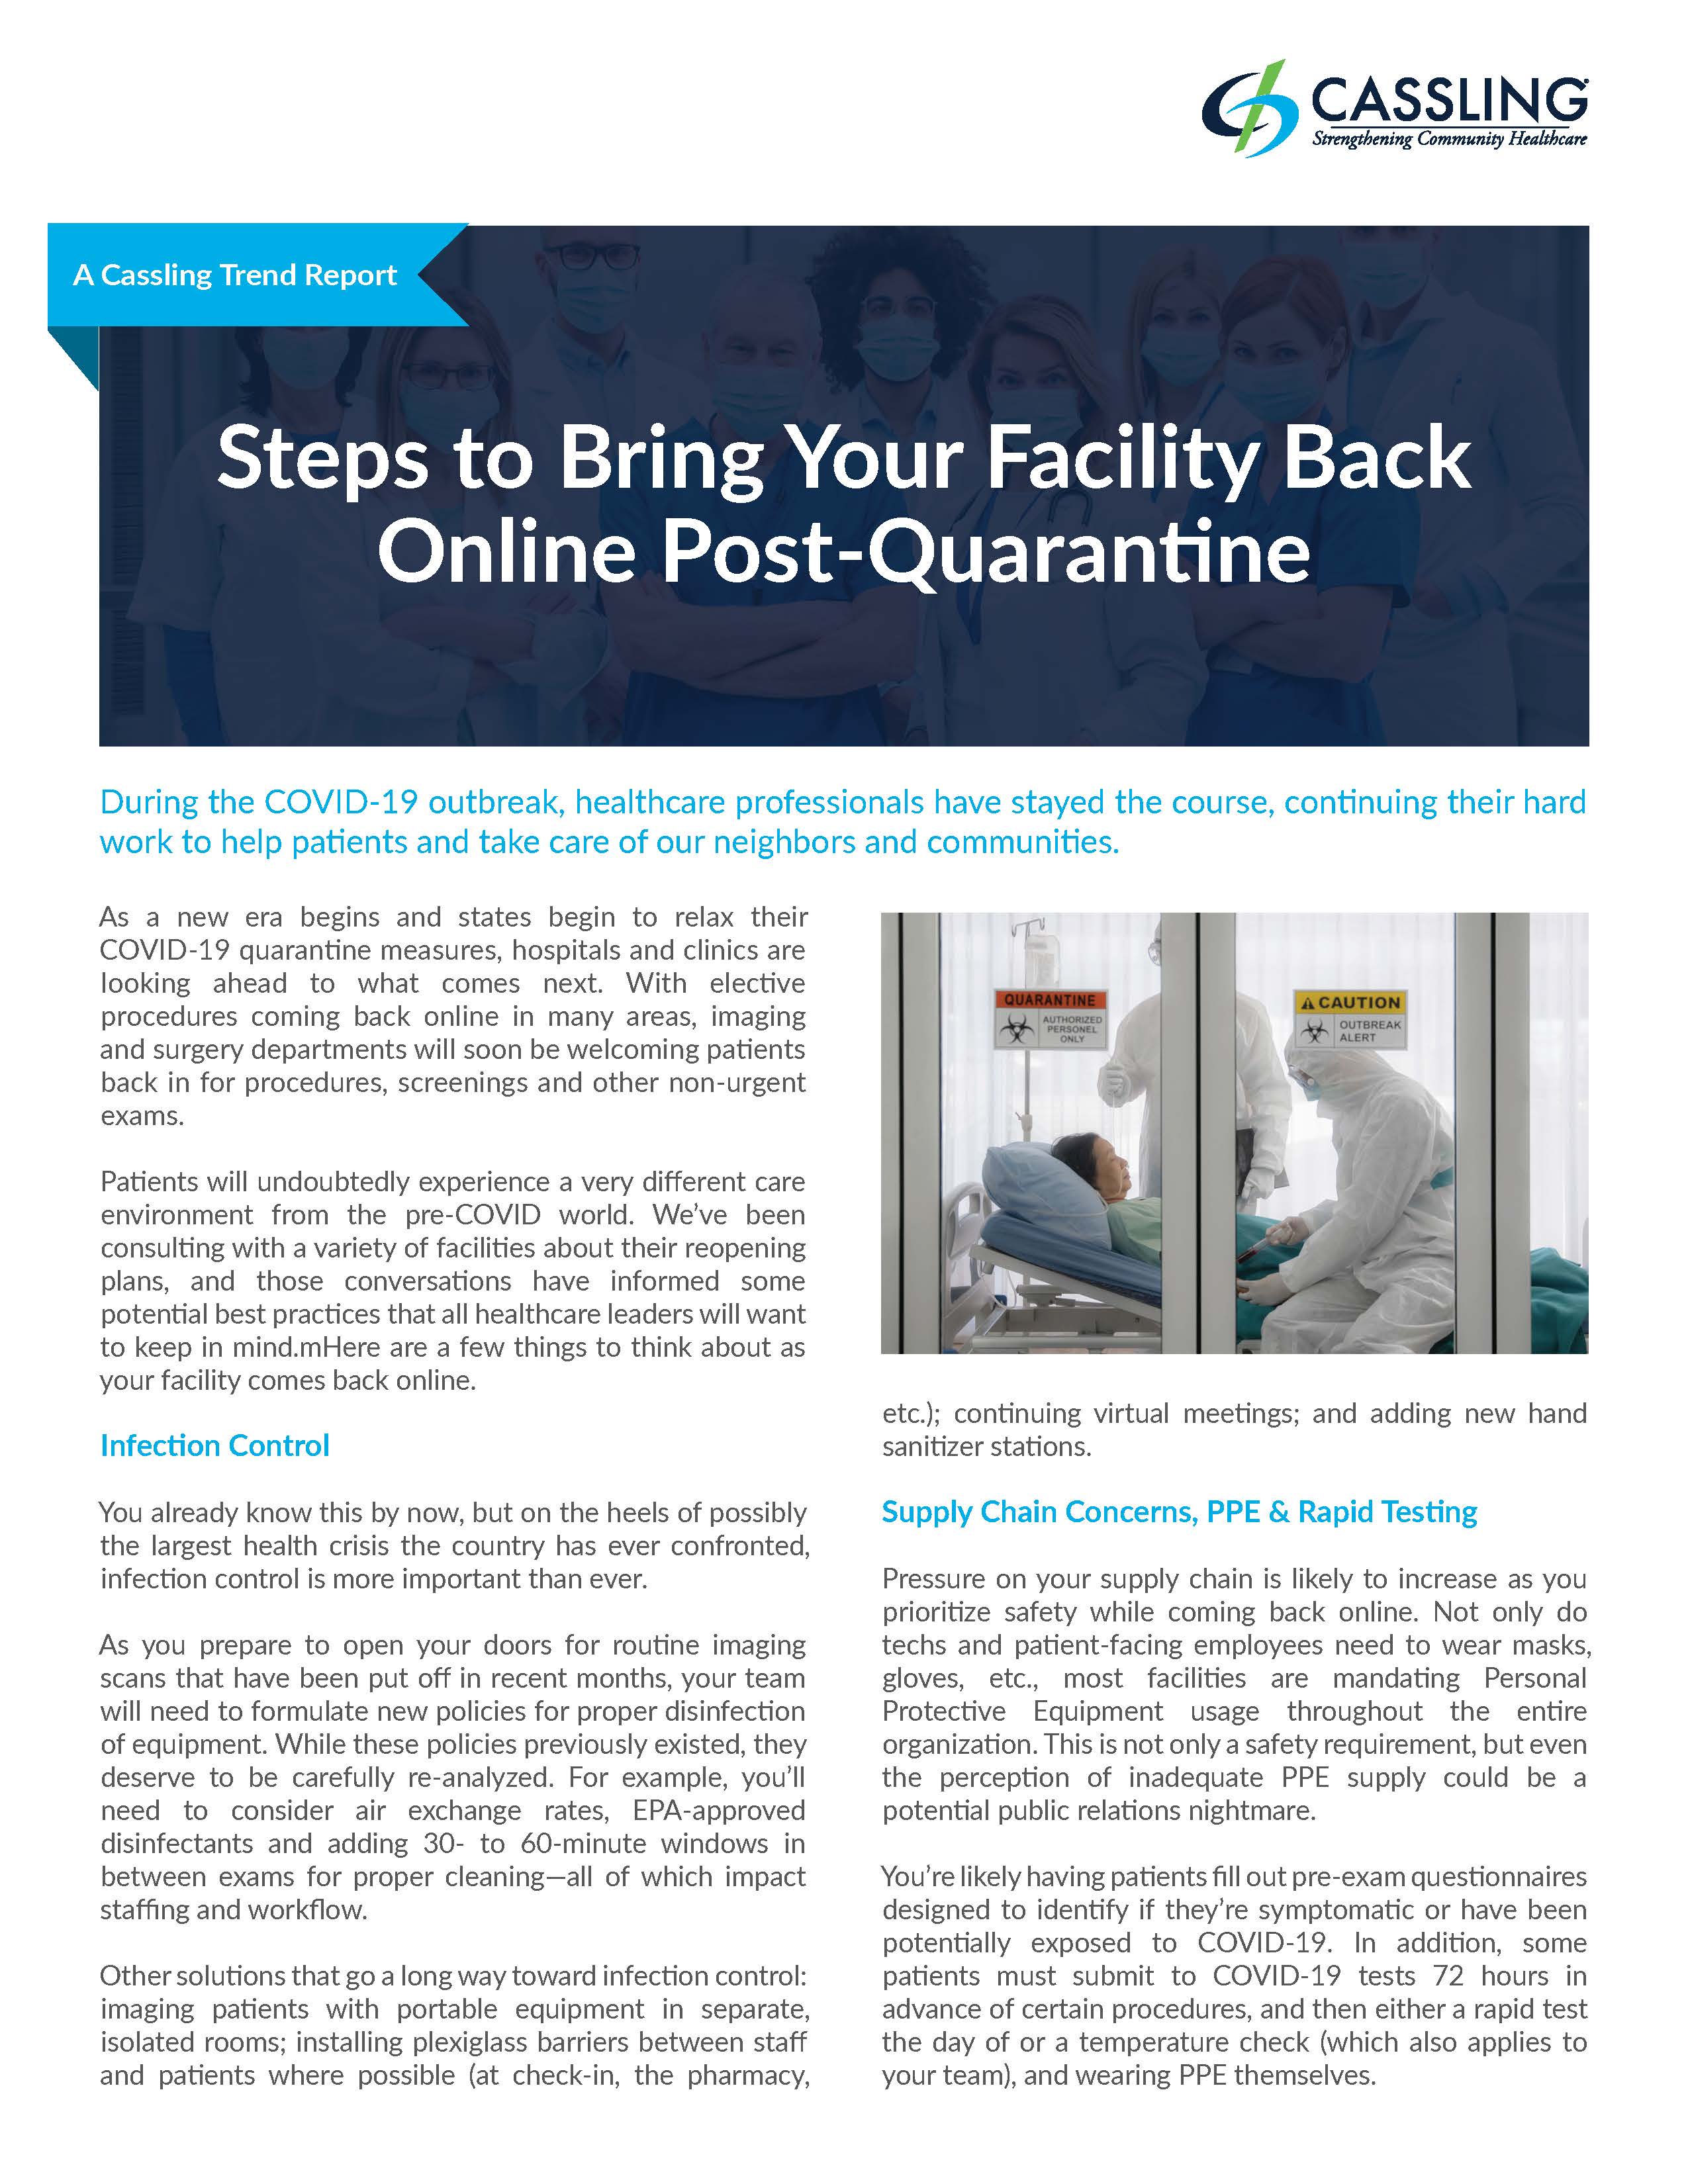 How-to-bring-your-facility-back-online-post-quarantine-TR-Cover